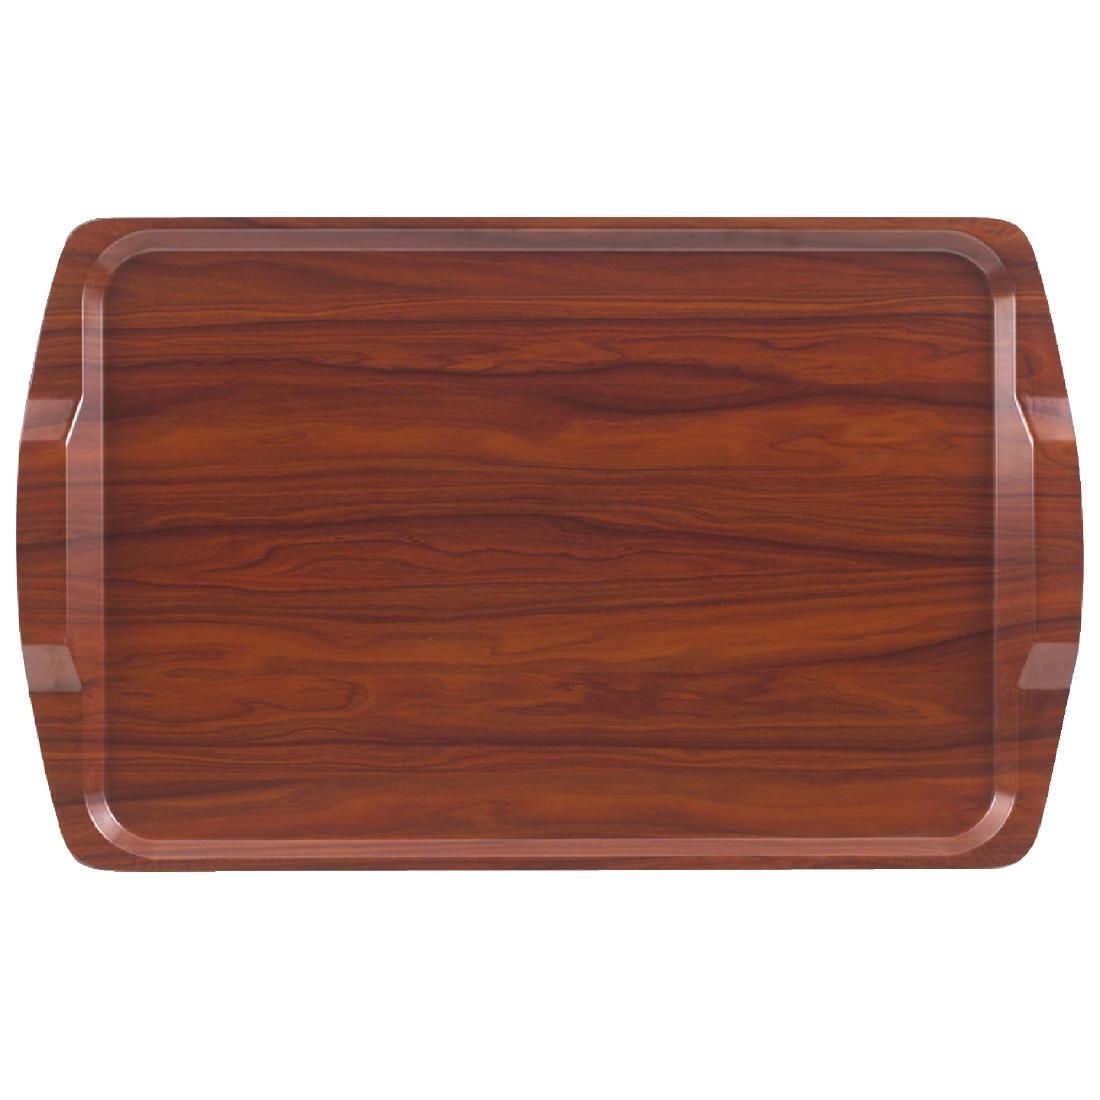 DL156 Cambro Walnut Laminate Room Service Tray With Handles 640mm JD Catering Equipment Solutions Ltd